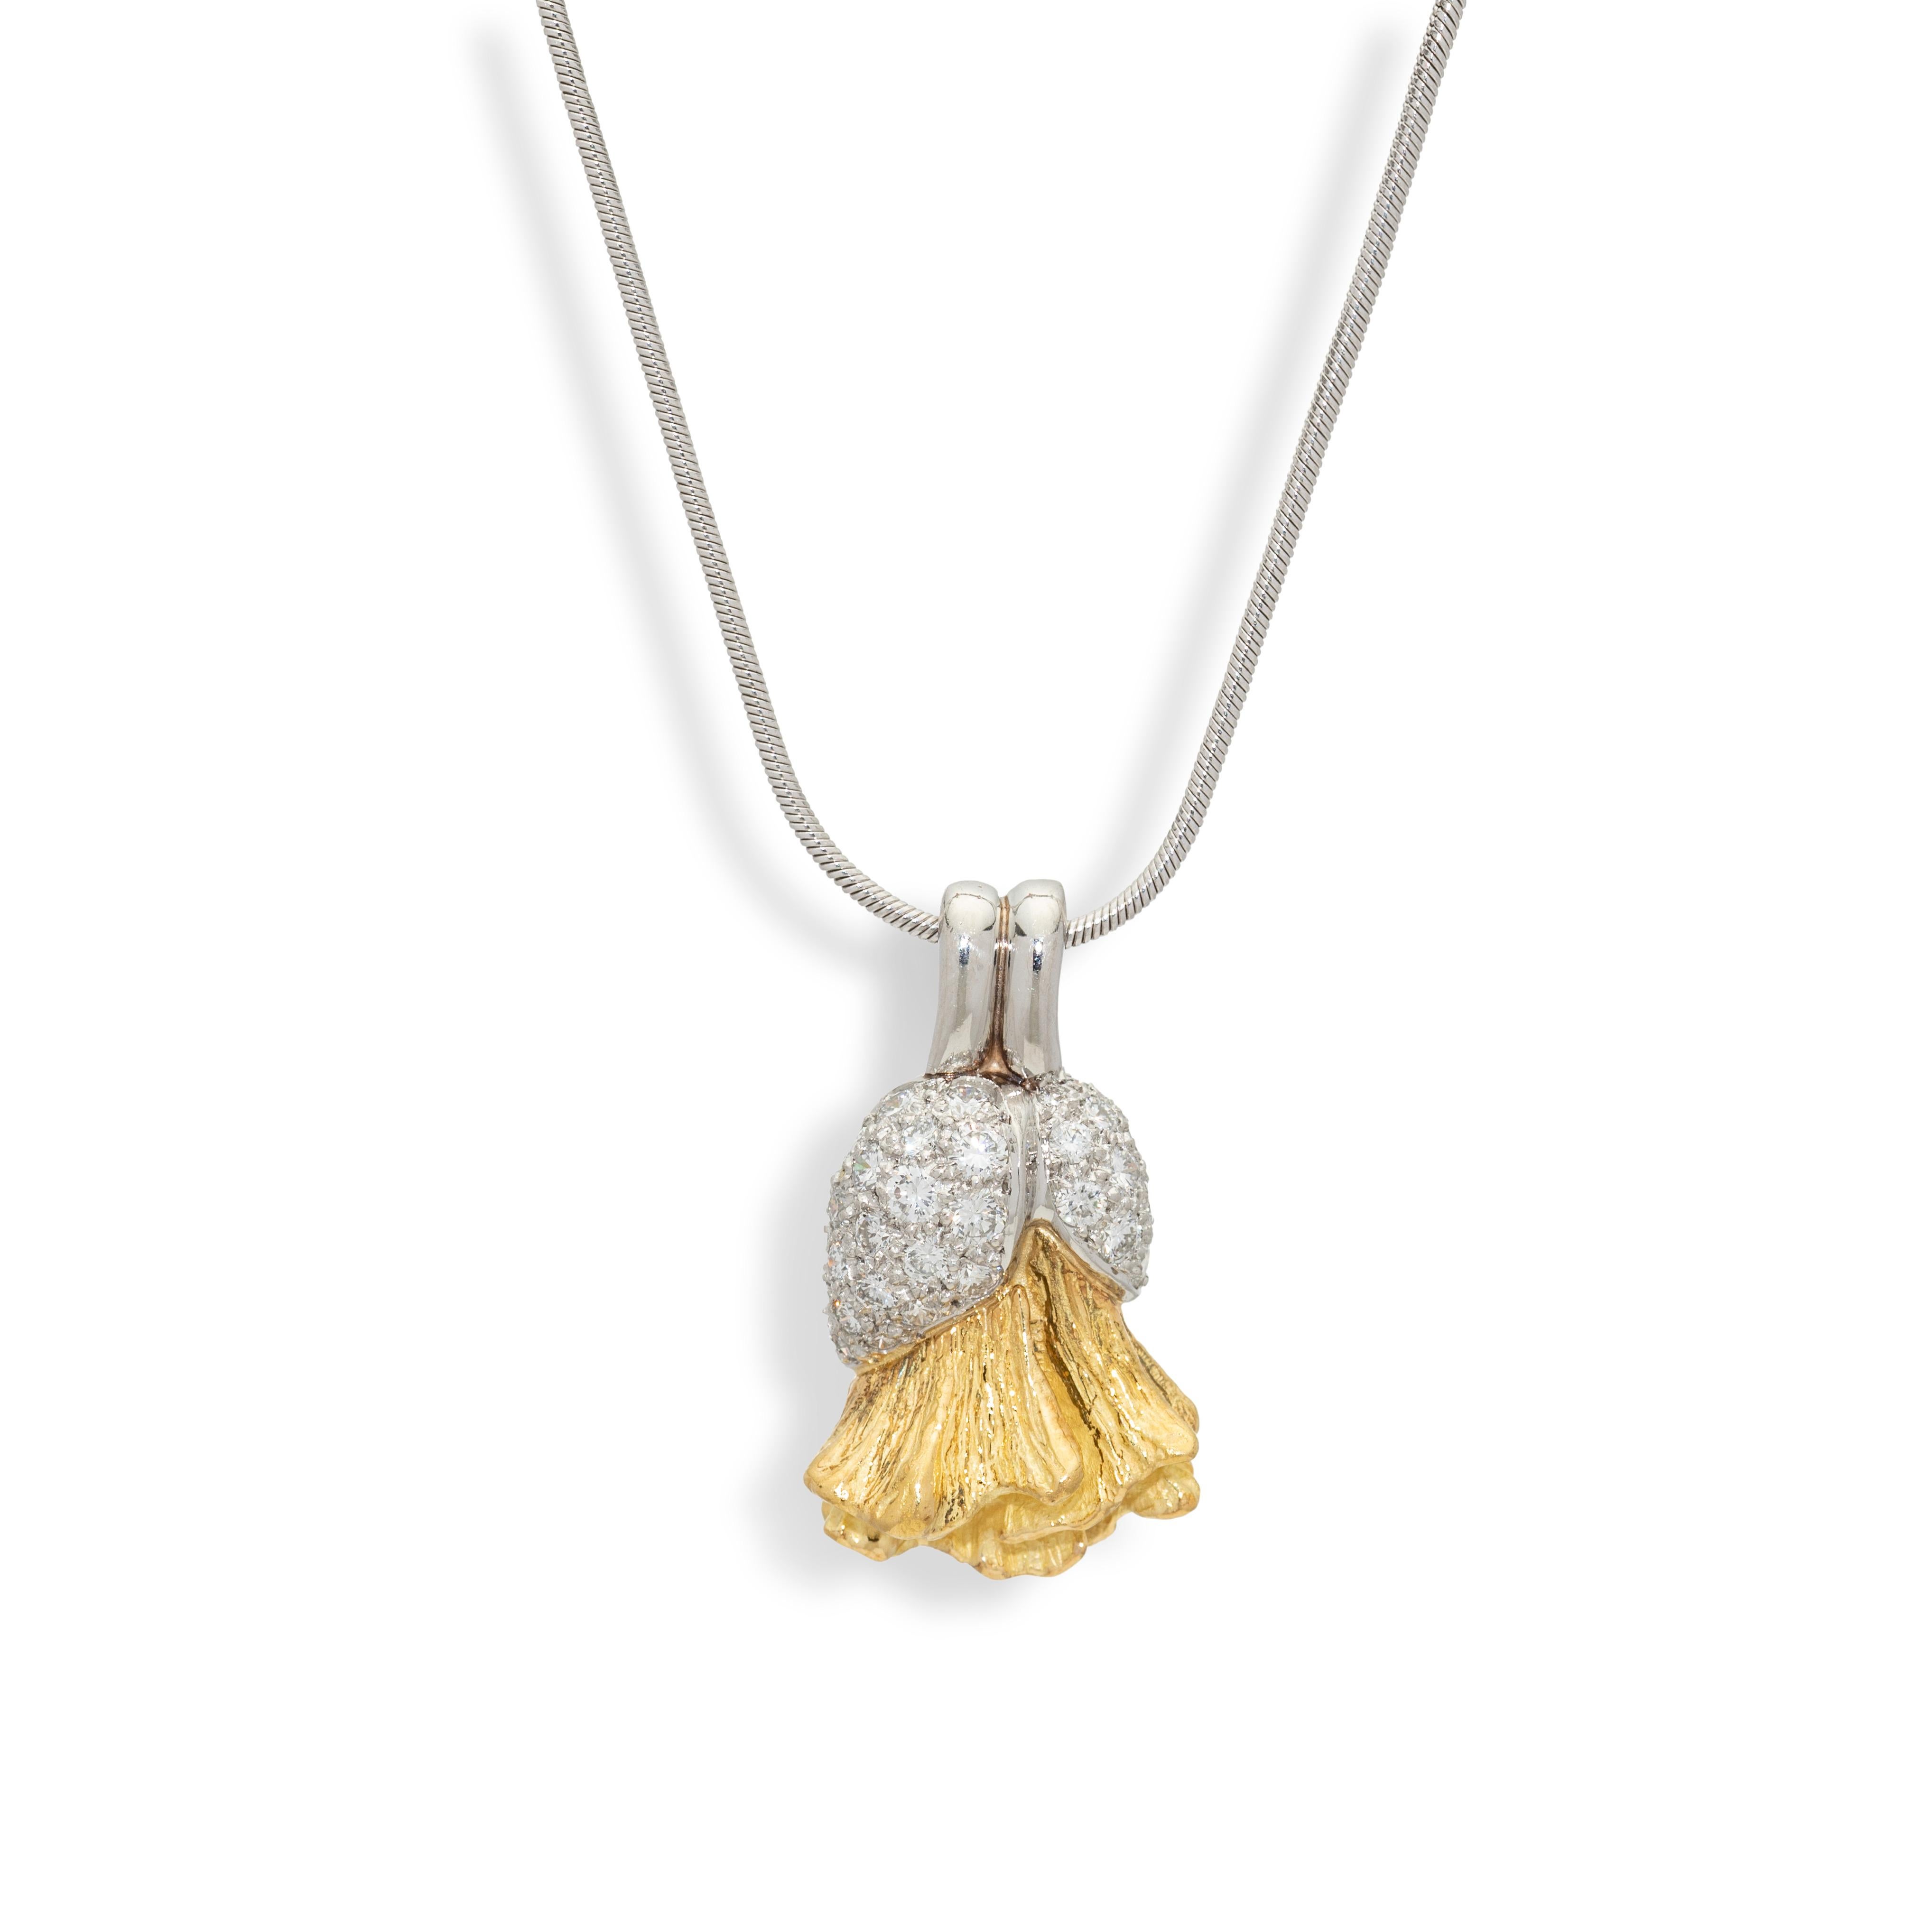 This magnificent pendant is part of the Poppy collection and features a finely carved Poppy flower in 18k yellow gold emerging from a diamond encrusted platinum bud for a contrast in colour and textures. Pair this wonderful work of art with the